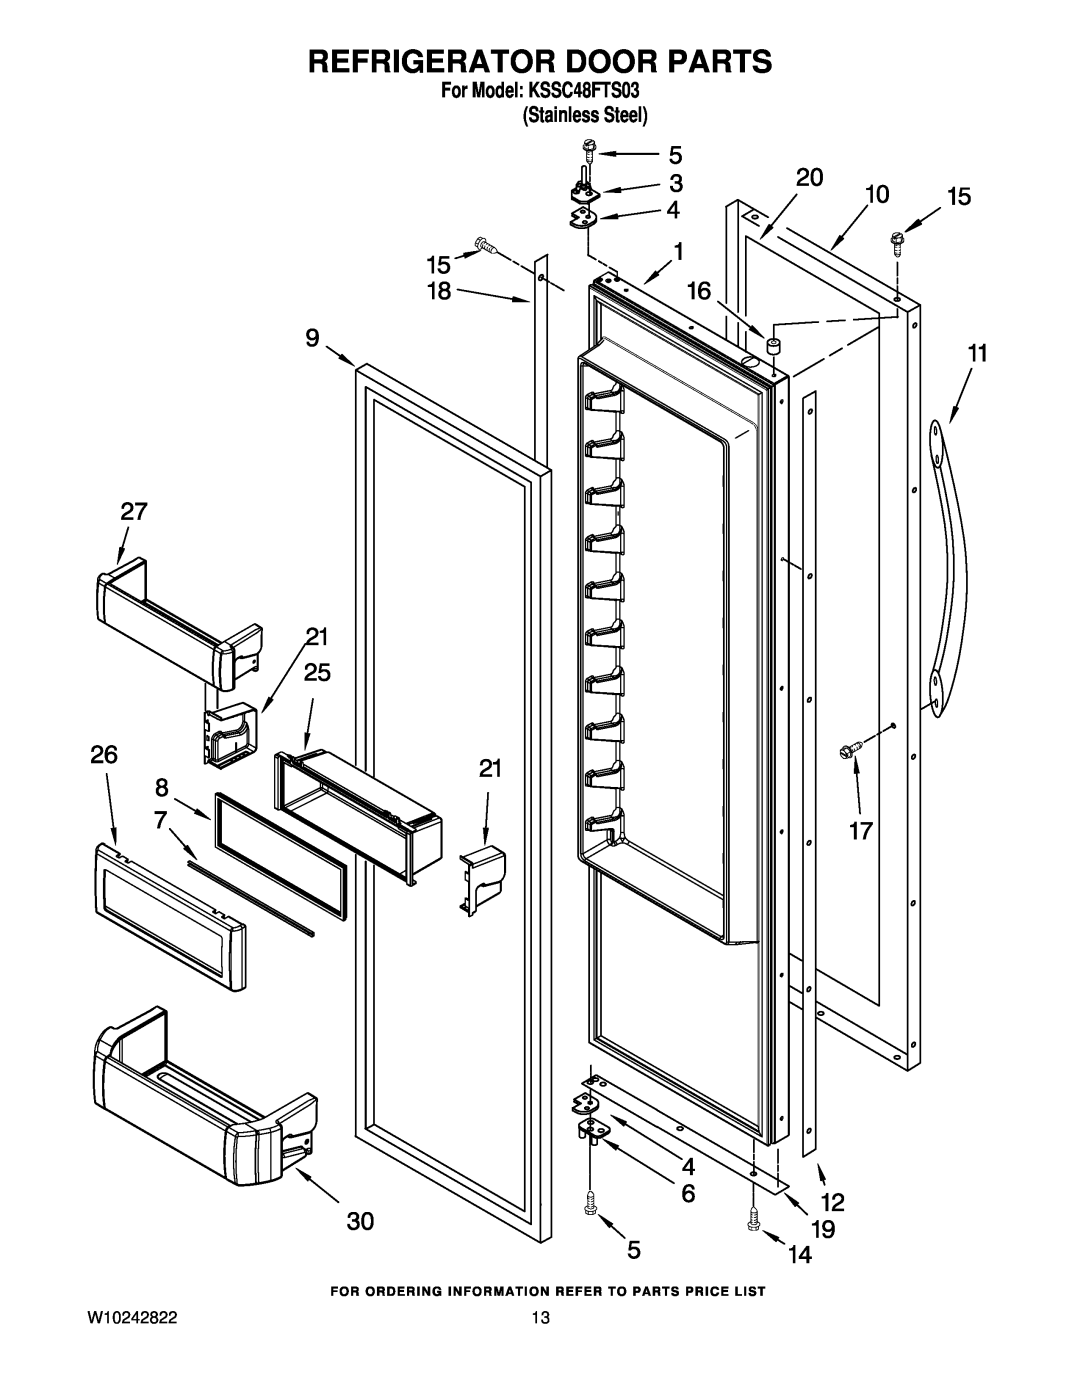 KitchenAid manual Refrigerator Door Parts, W10242822, For Model KSSC48FTS03 Stainless Steel 